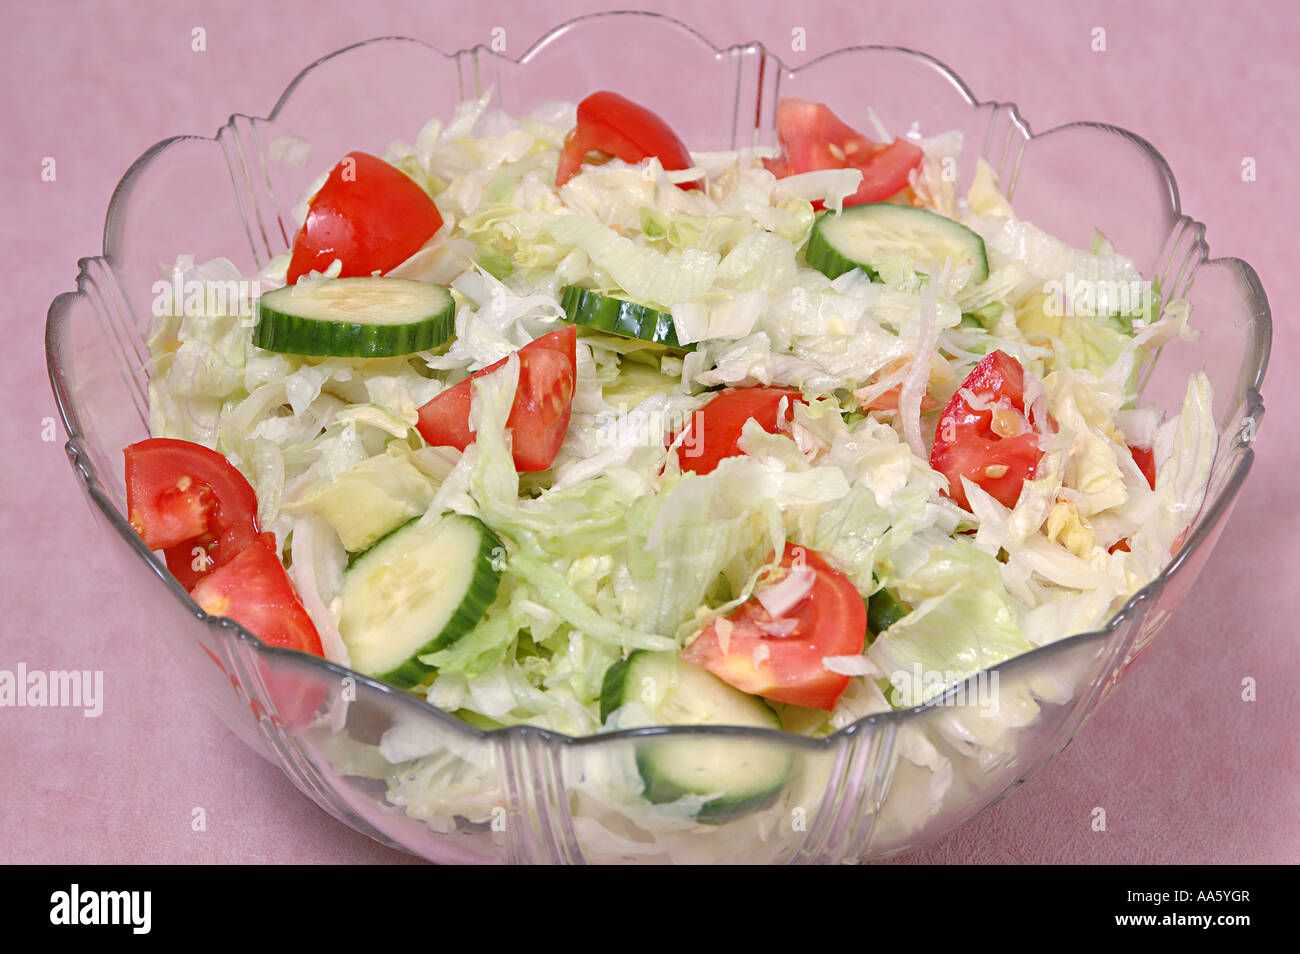 ANG103765 Food Salad Cucumber slices Tomato in pieces Ice burg Salad chopped in a glass bowl Stock Photo